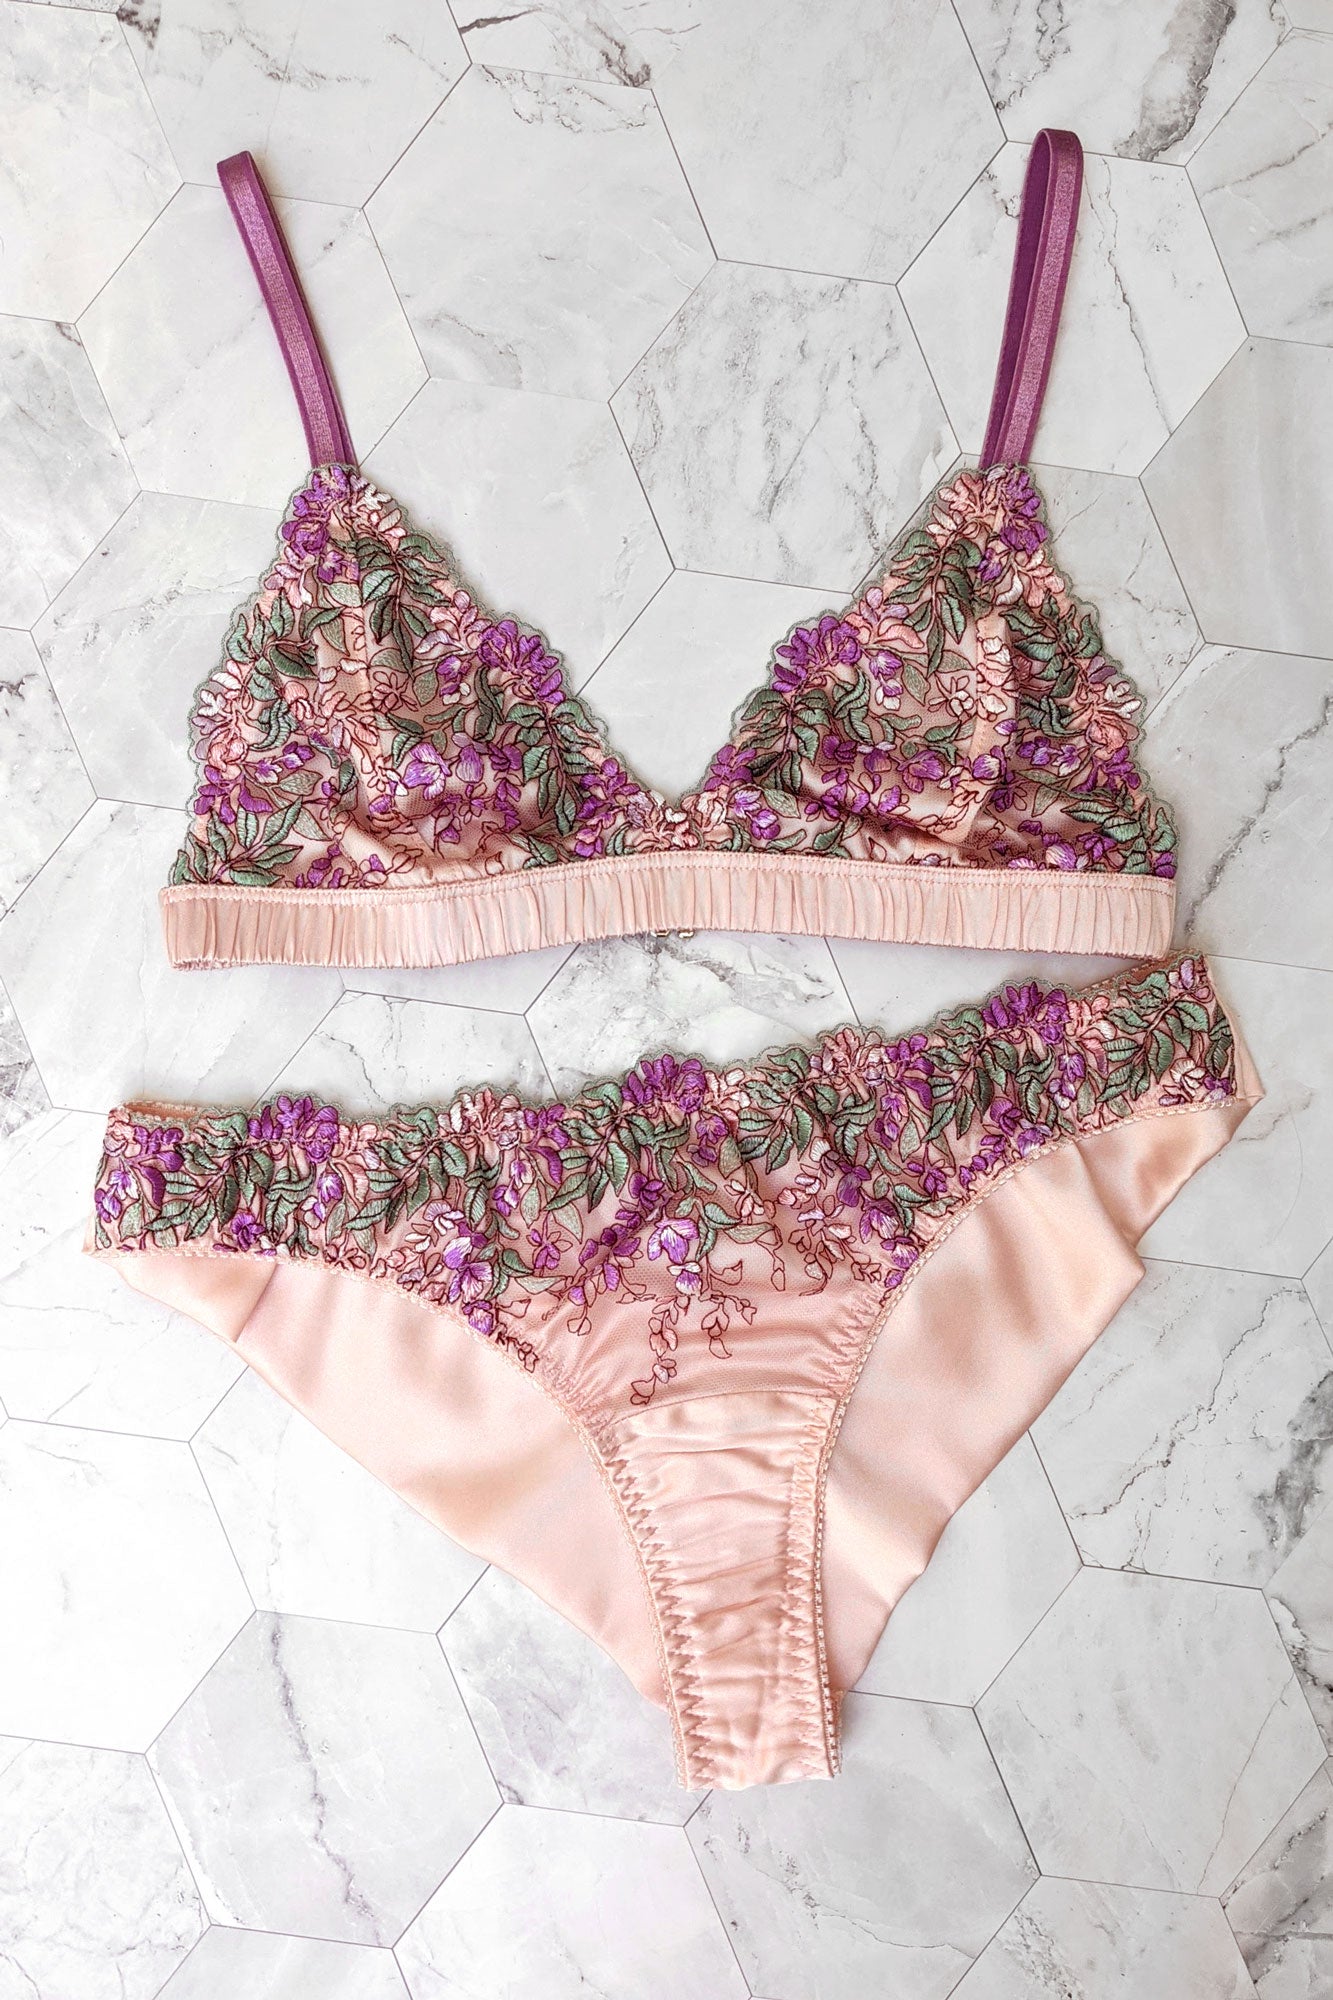 Luxury silk knickers with floral embroidery in pink, purple, and lilac